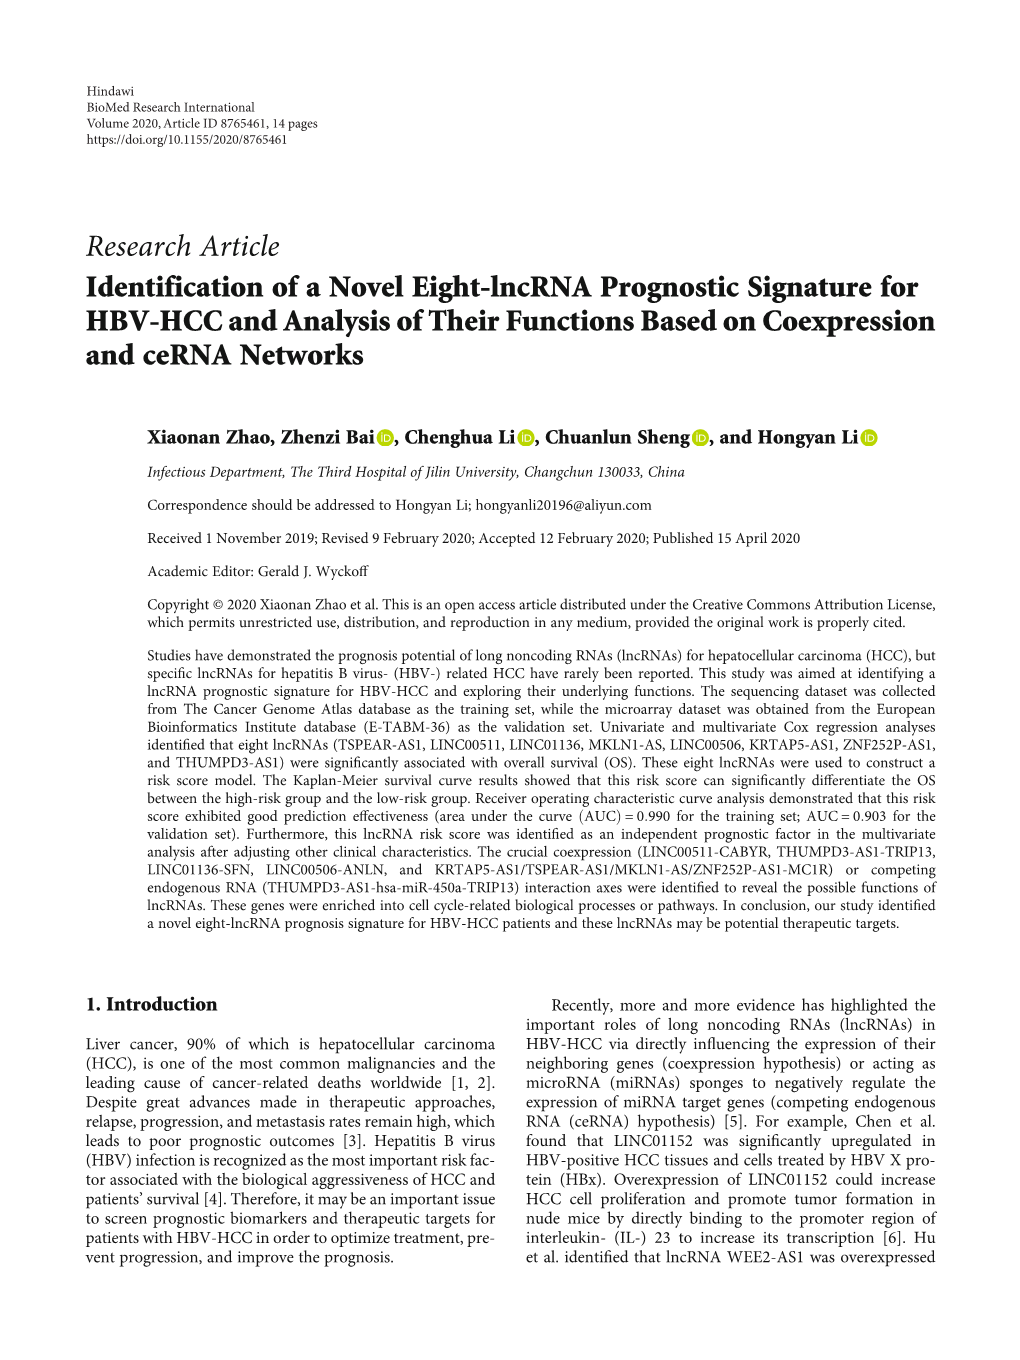 Research Article Identification of a Novel Eight-Lncrna Prognostic Signature for HBV-HCC and Analysis of Their Functions Based on Coexpression and Cerna Networks